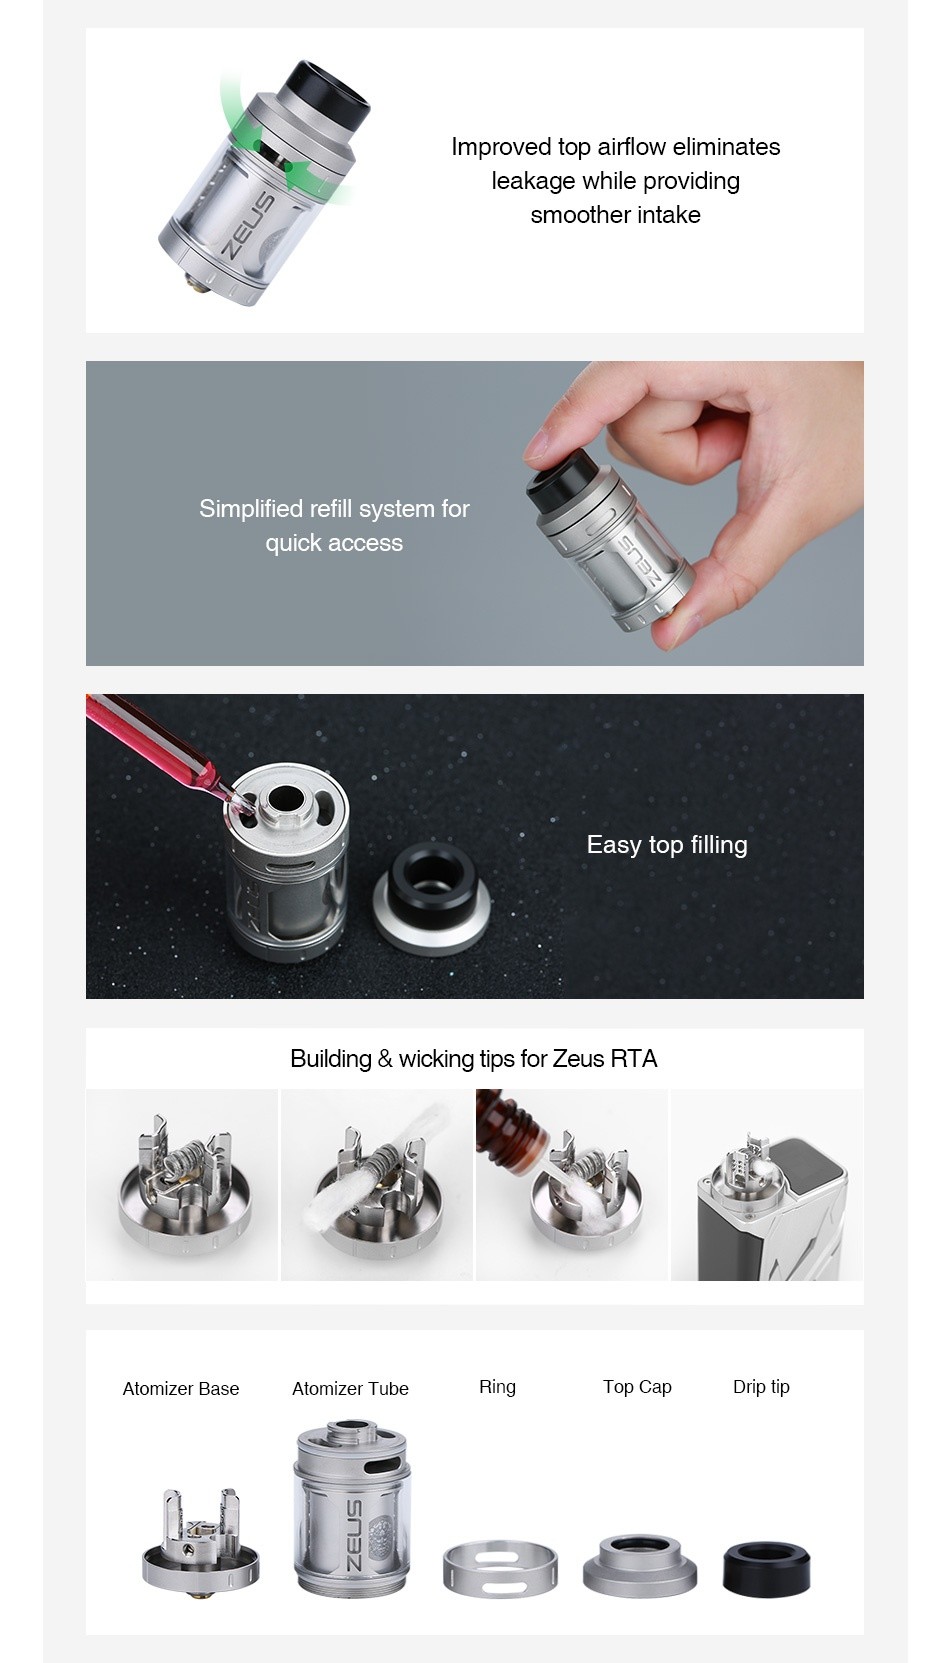 GeekVape Zeus RTA 4ml mproved top airflow eliminates leakage while providing smoother intake Simplified refill system for quick access Easy top filling Building wicking tips for zeus rta Atomizer Base Atomizer Tube Ring Top cap Drip tip 0UN